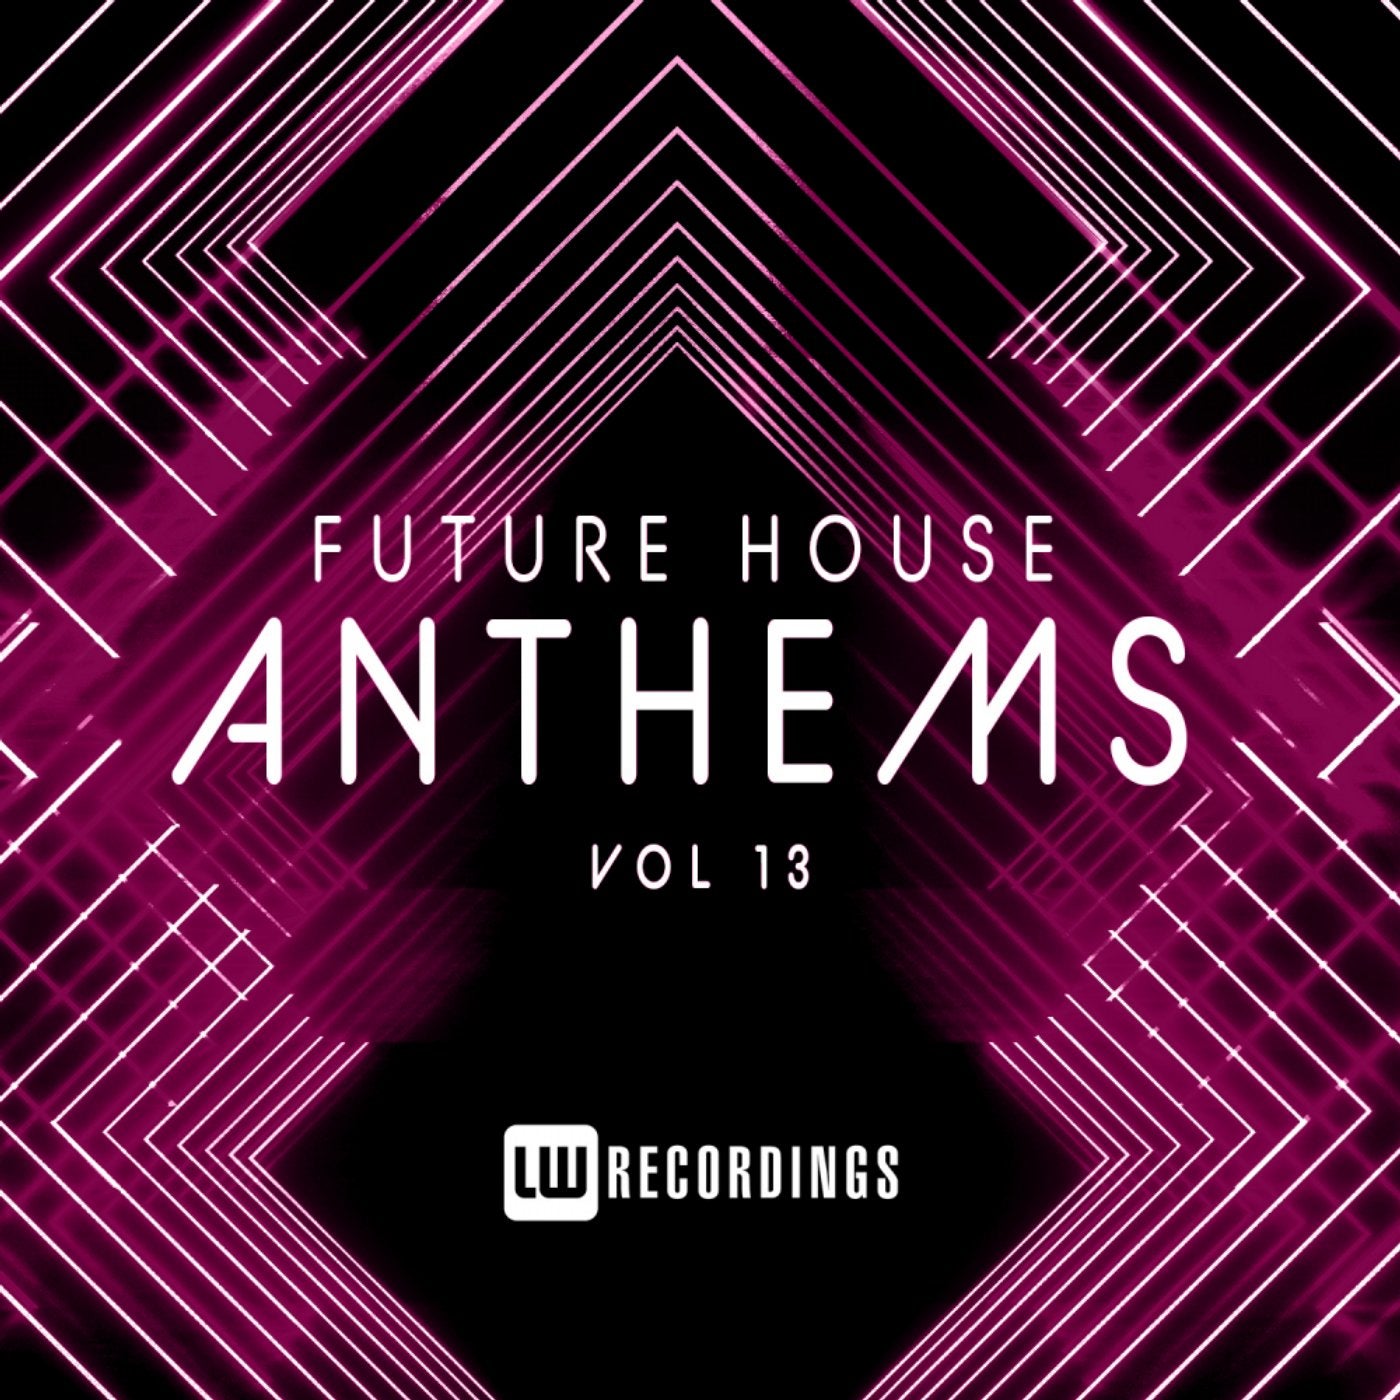 Future House Anthems, Vol. 13